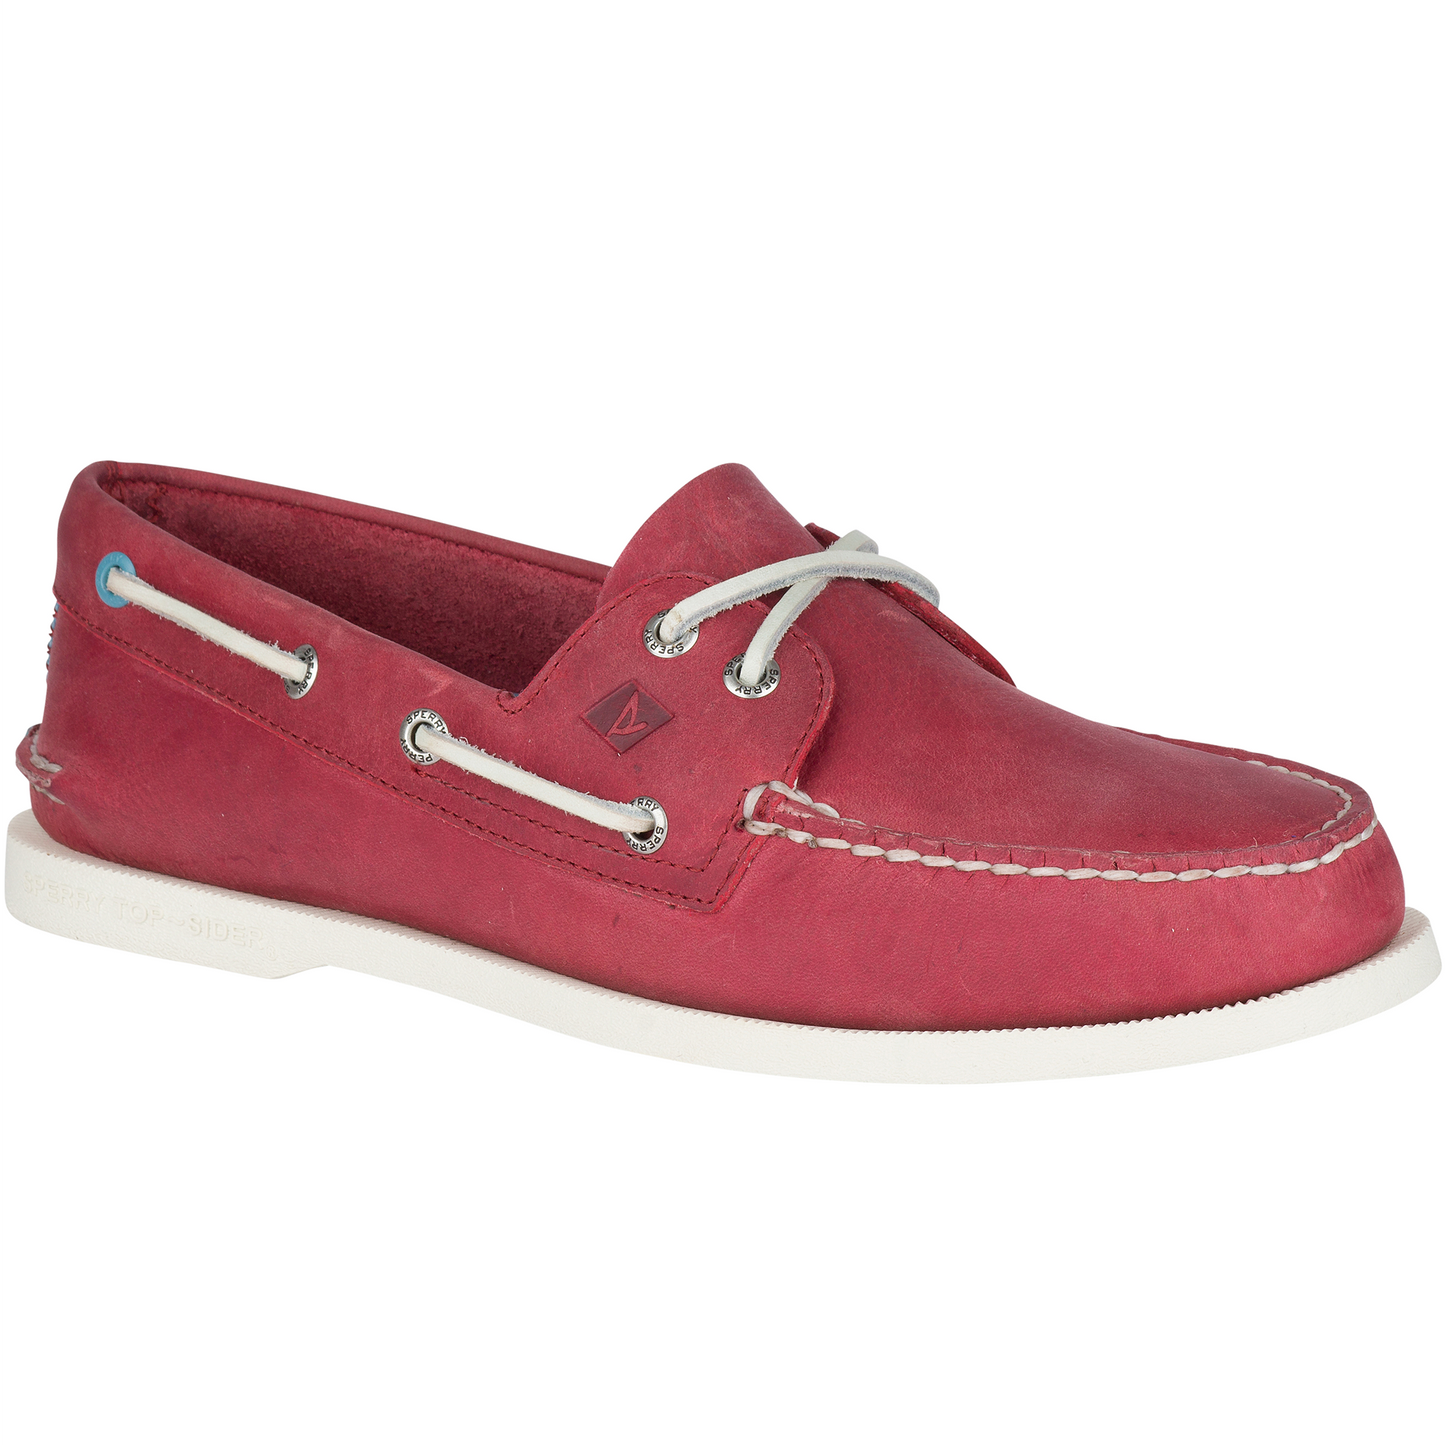 Sperry Men's Authentic Original Richtown Red Boat Shoes (STS19459)